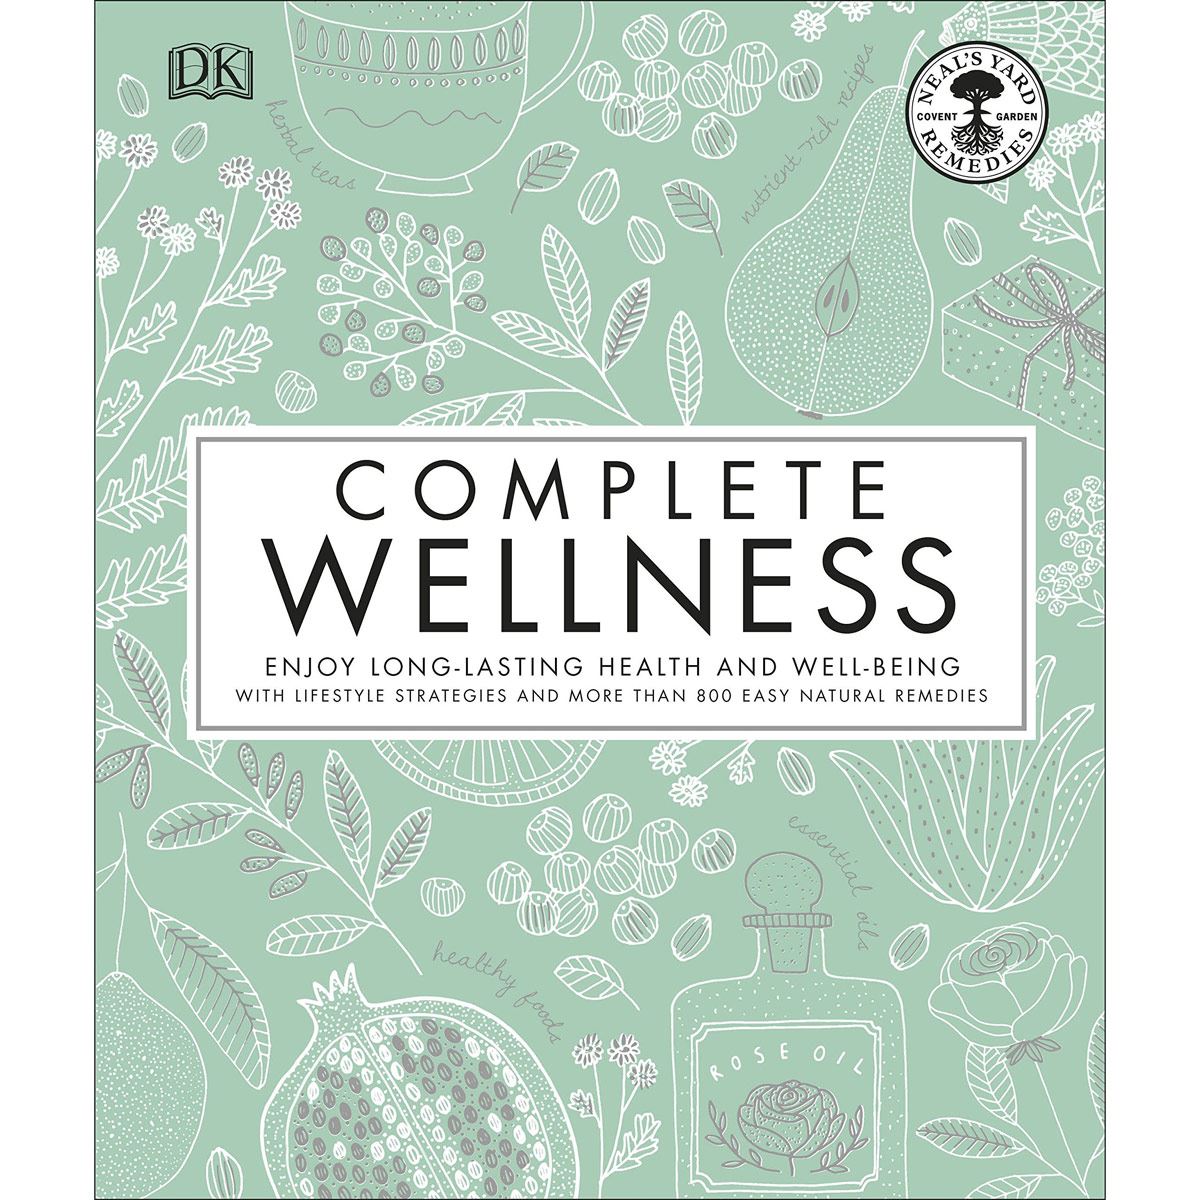 Complete Wellness: Enjoy Long-Lasting Health And Well-Being With More Than 800 Natural Remedies